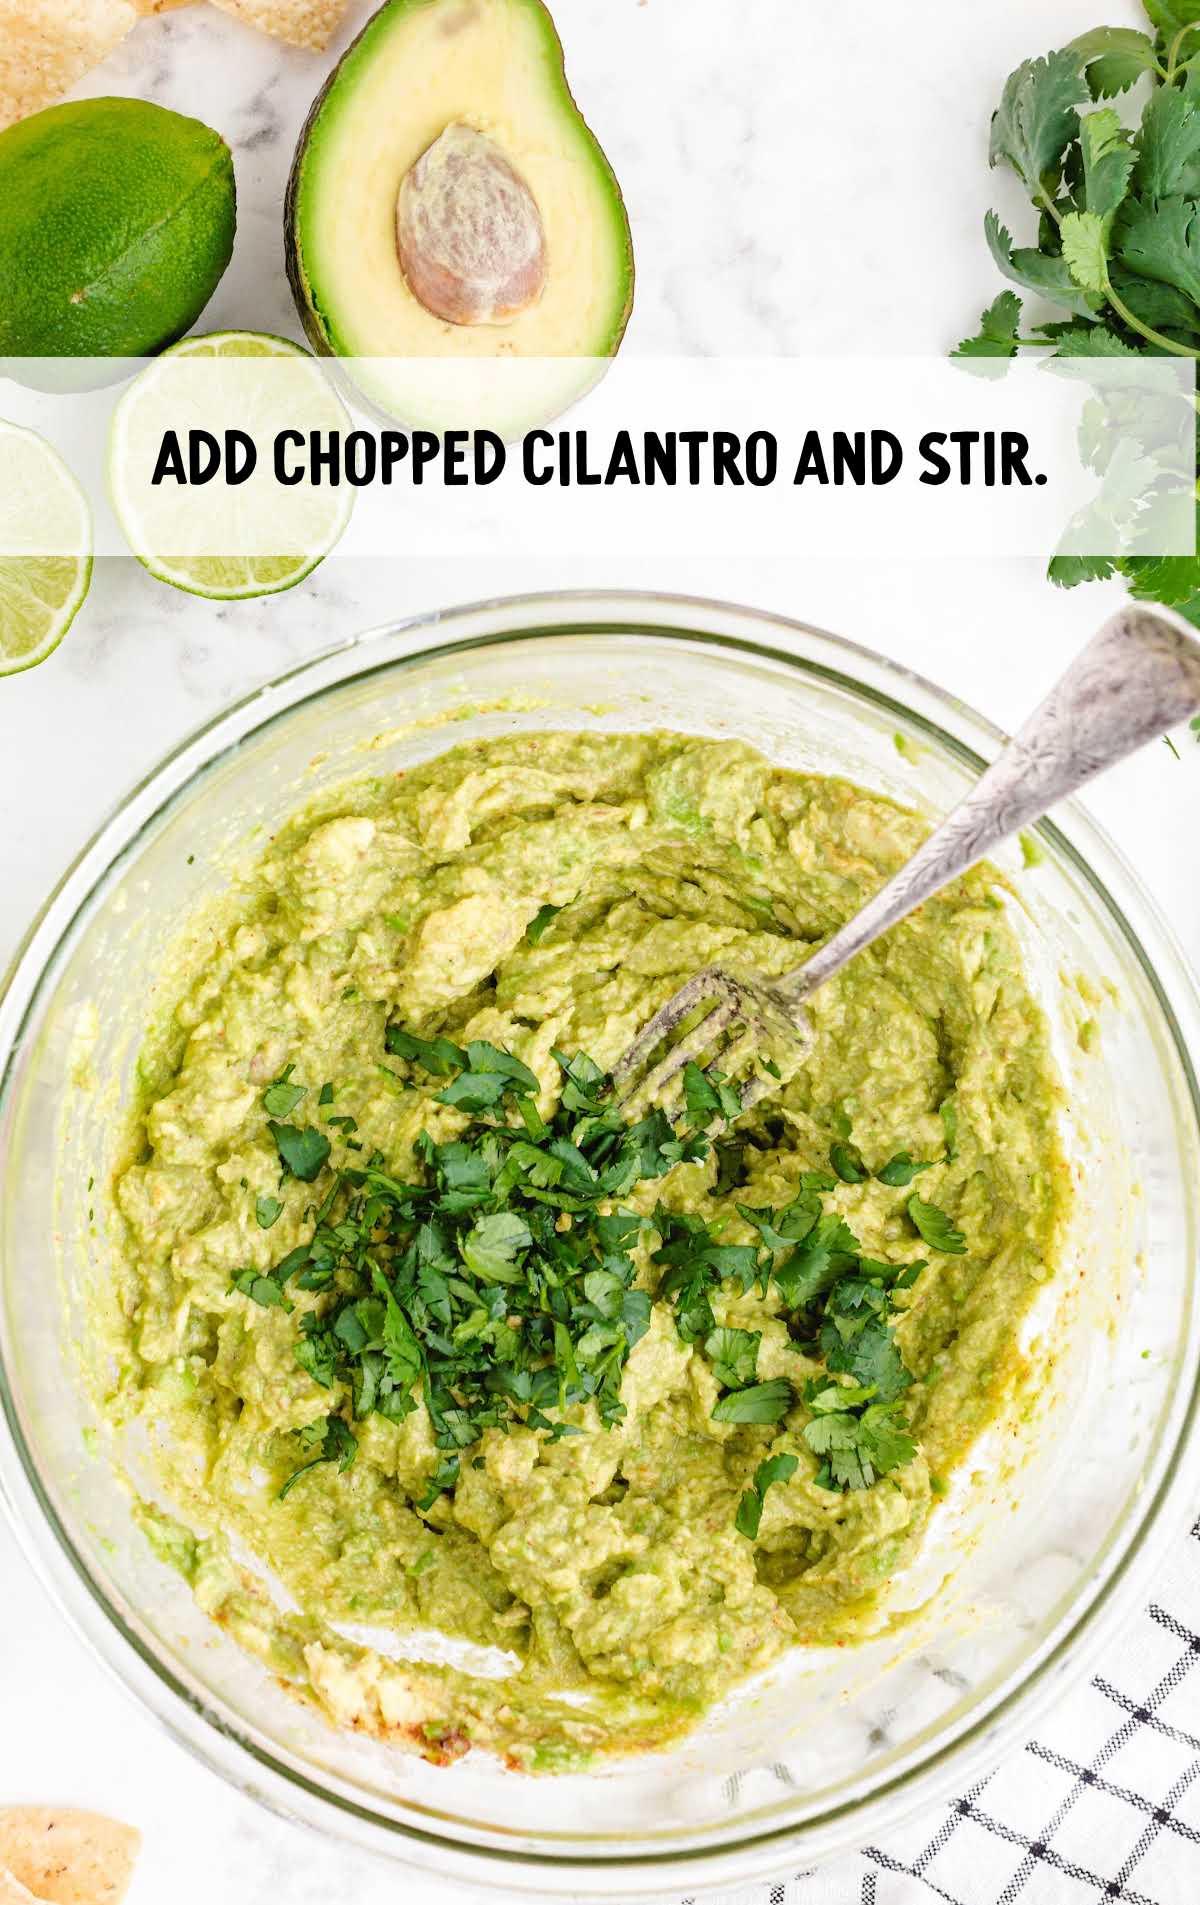 chopped cilantro added and stirred together in a bowl